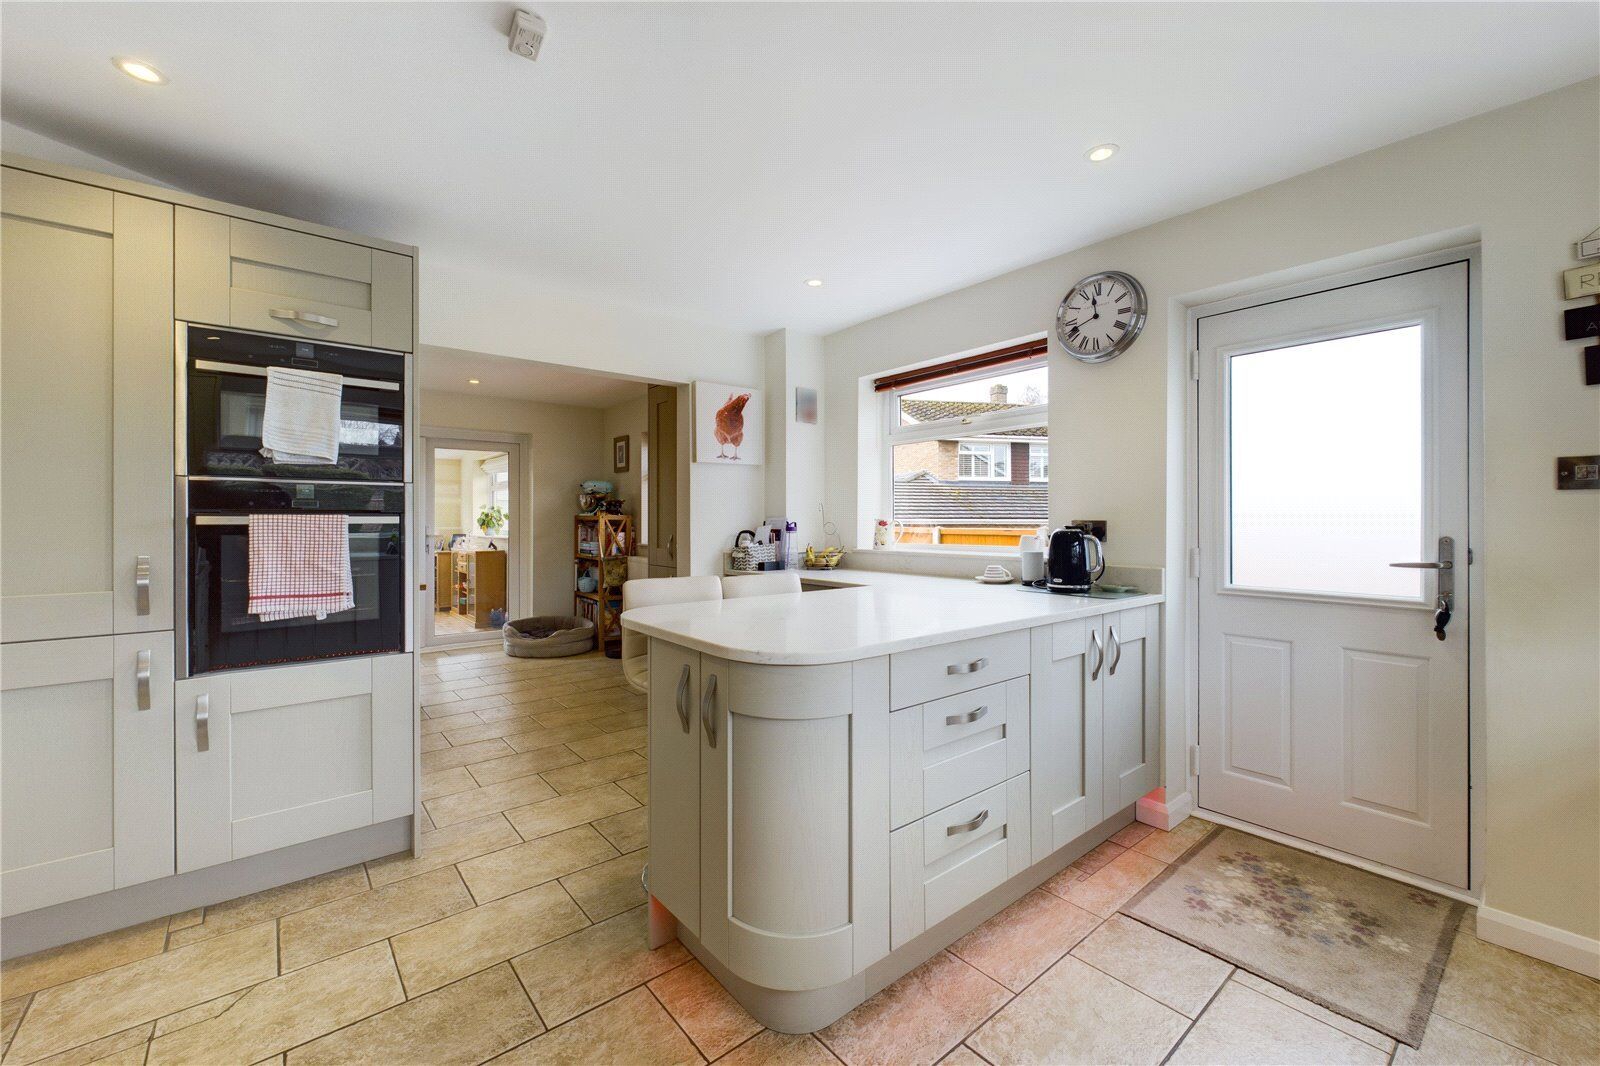 4 bedroom detached house for sale Fairfield, Gamlingay, SG19, main image